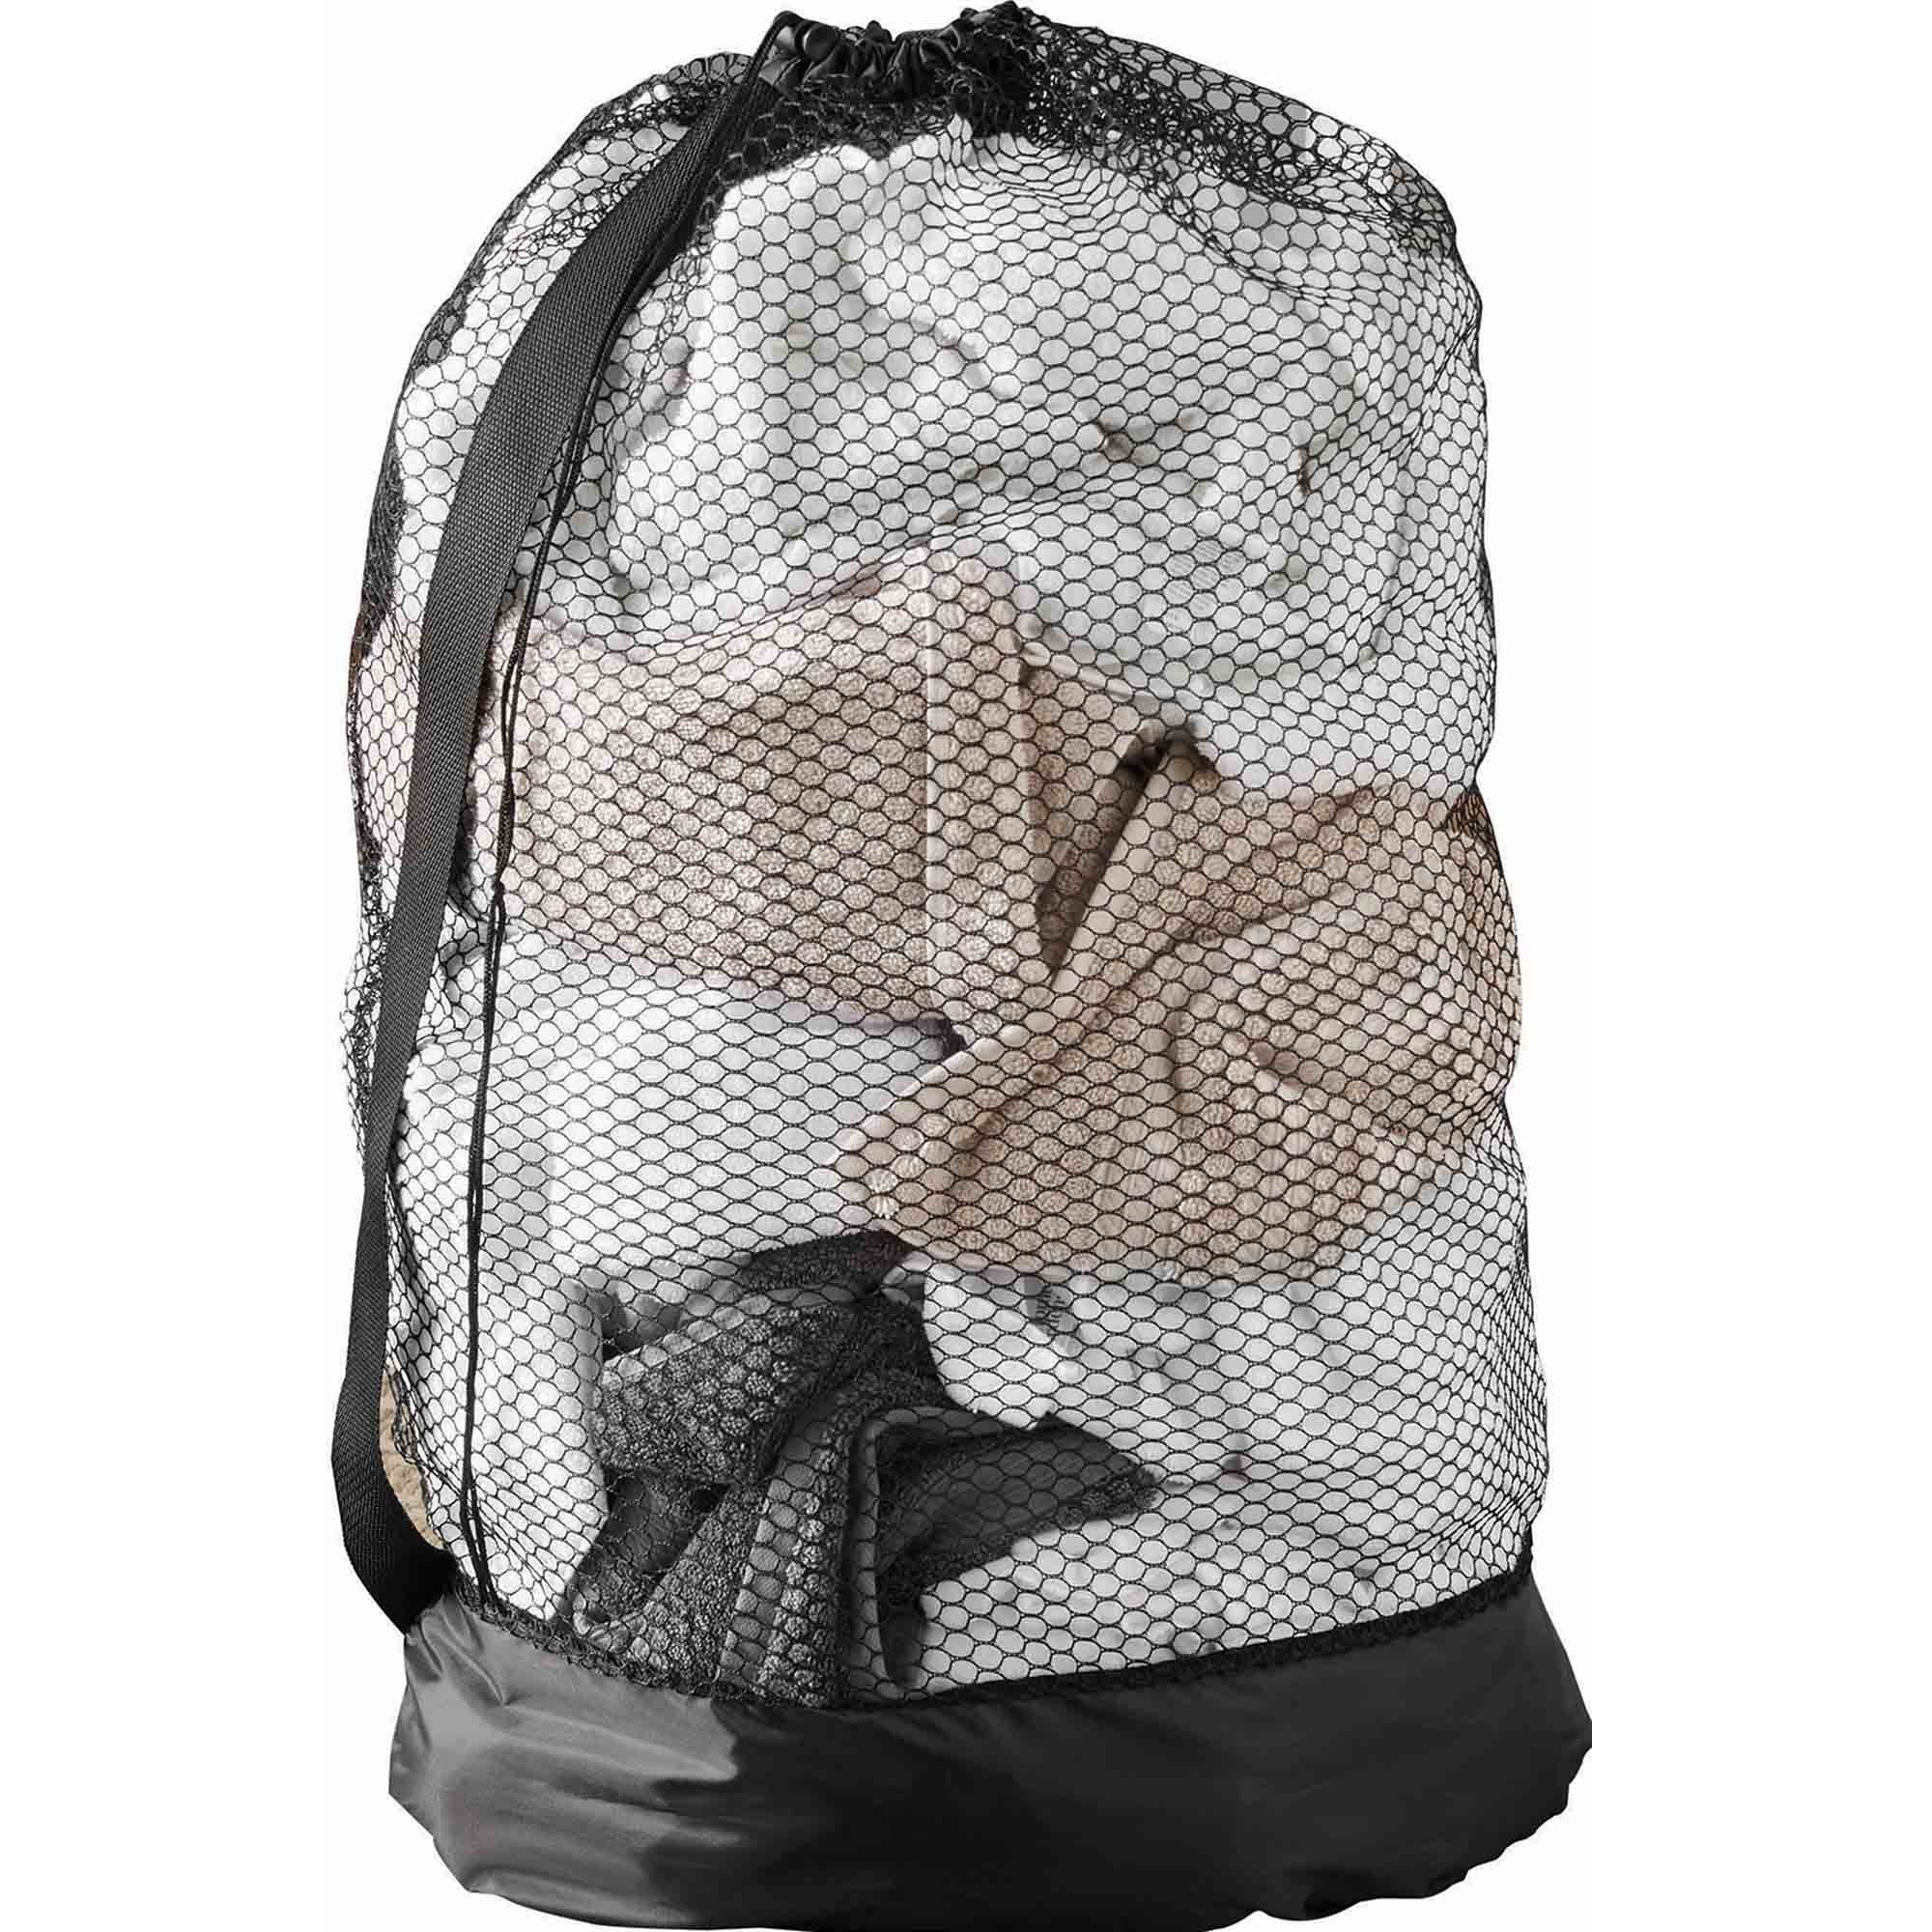 Mesh Laundry Bag Industrial Laundry Bag Dirty Clothes Storage vs 